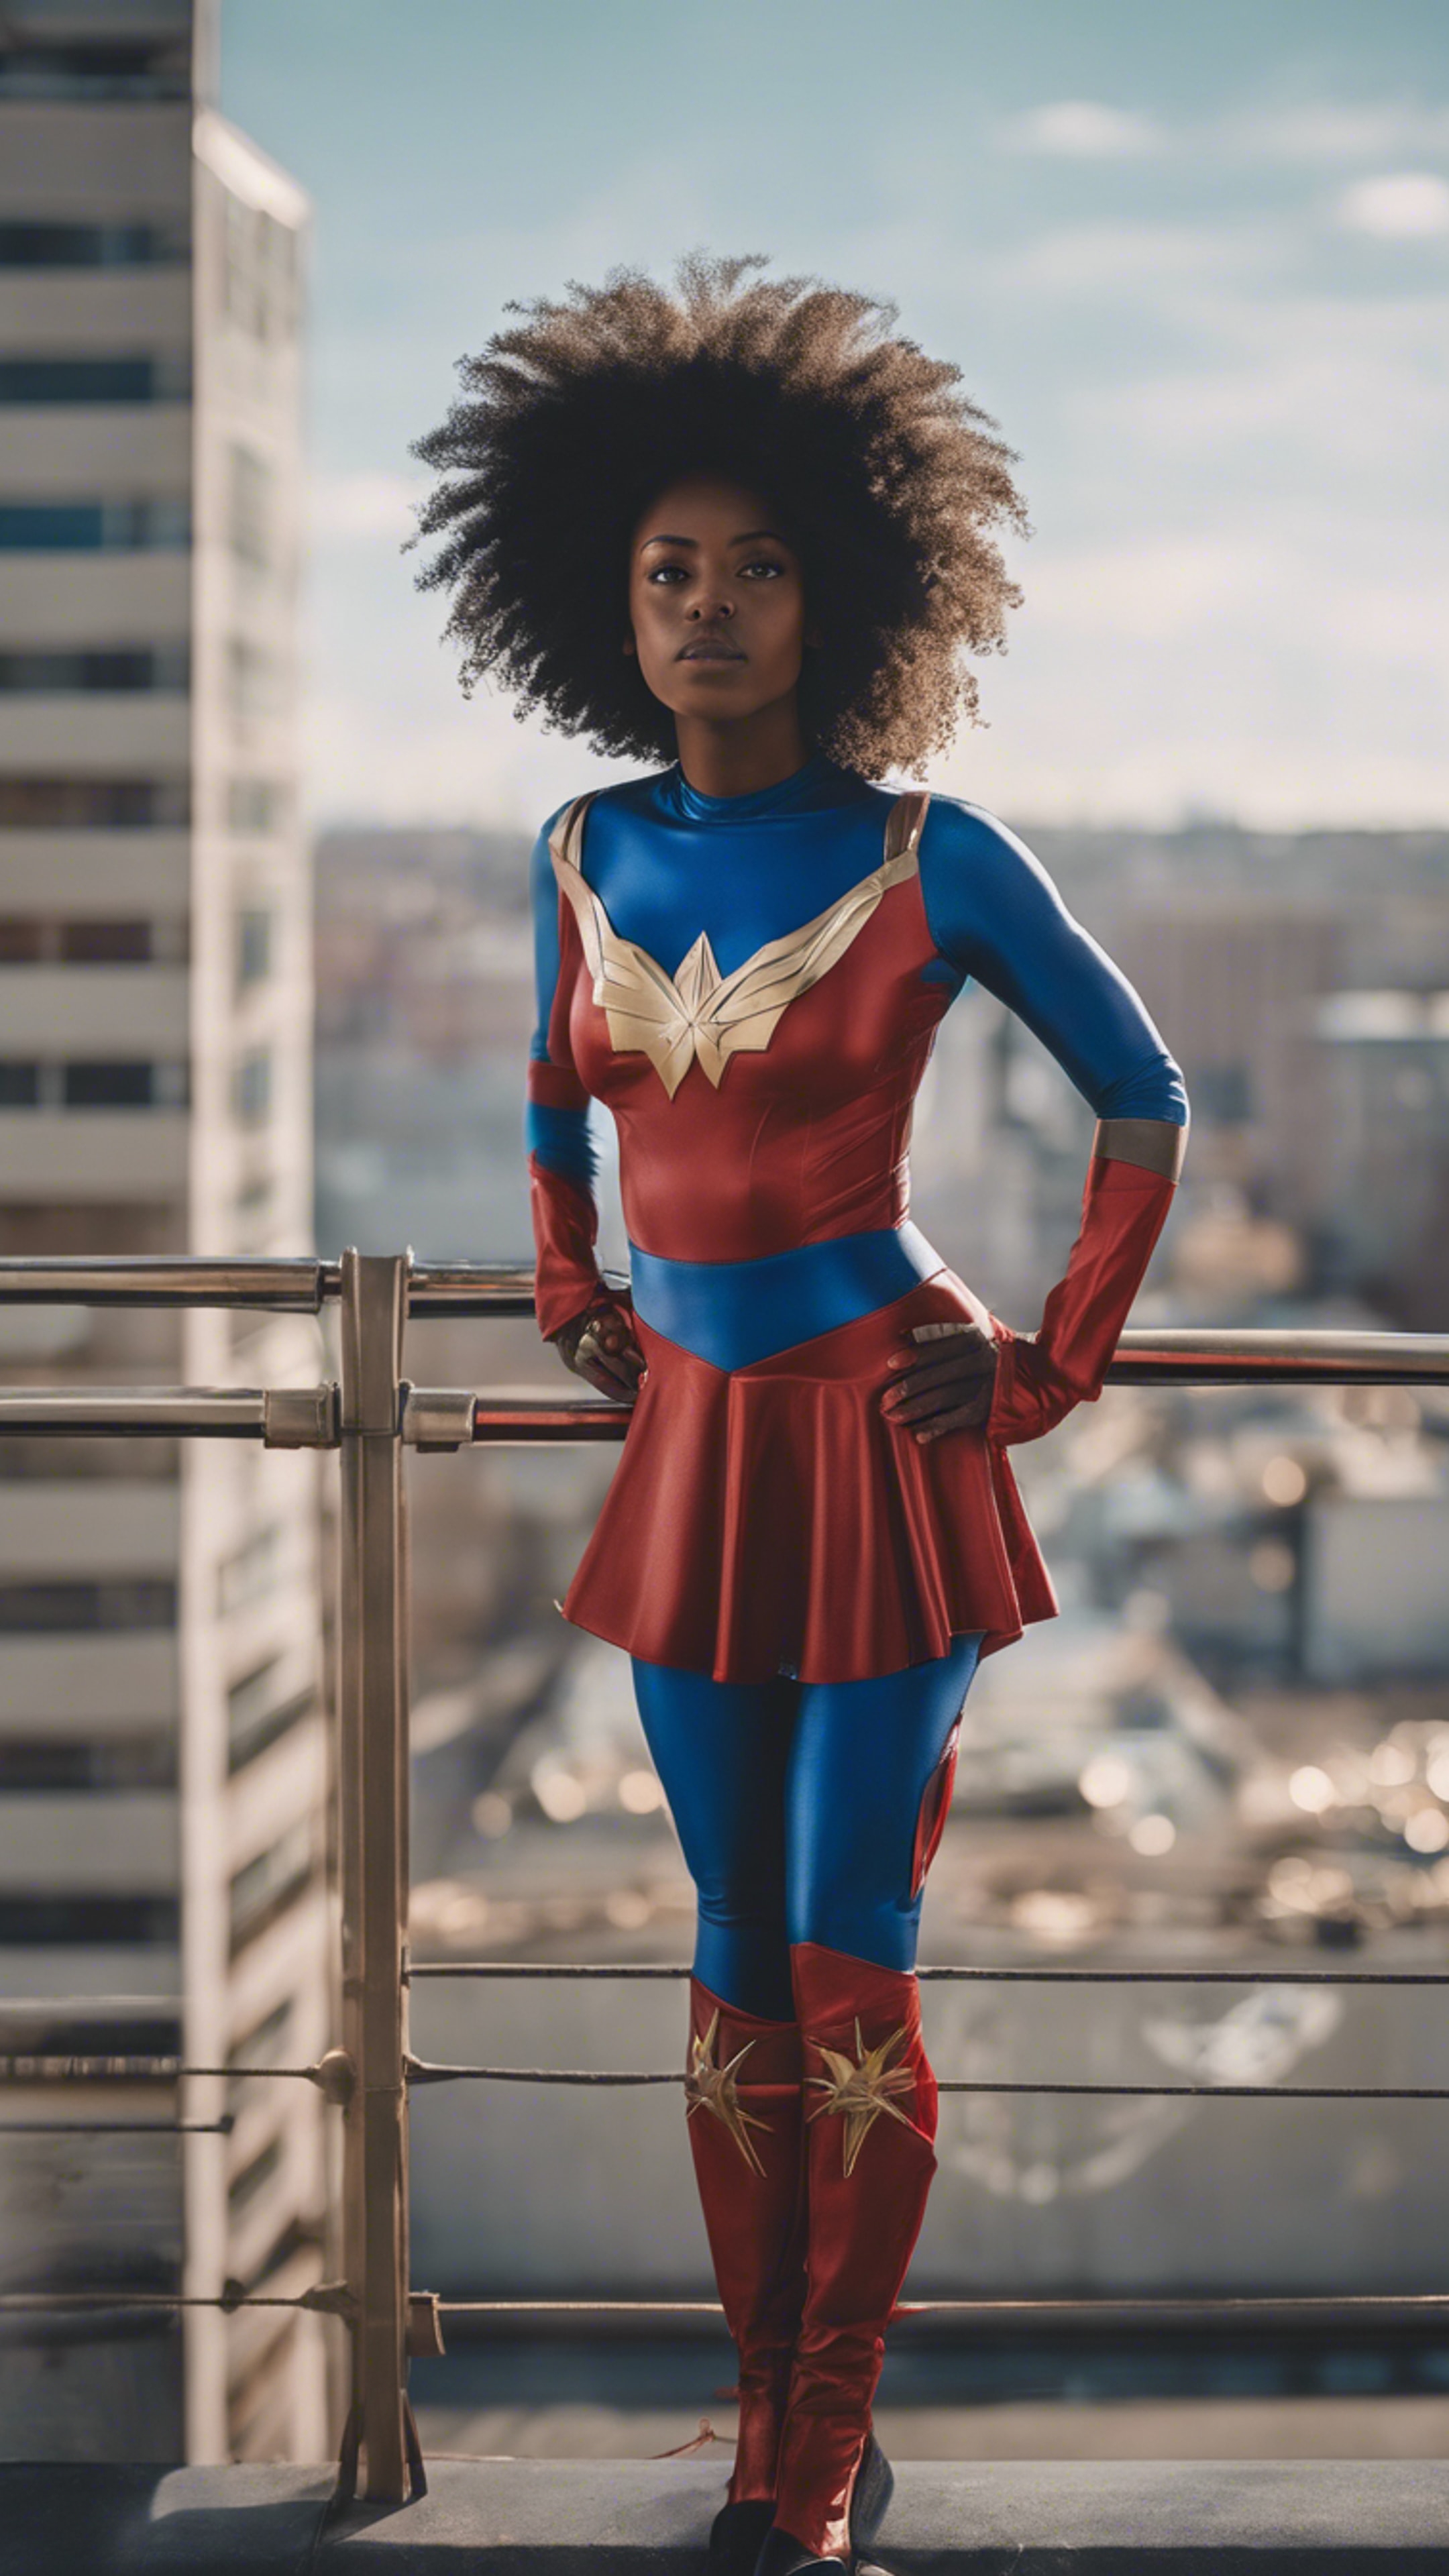 A black girl wearing a superhero costume, standing strong on top of a tall building. Tapetai[591a0dfe38314cf2b9da]